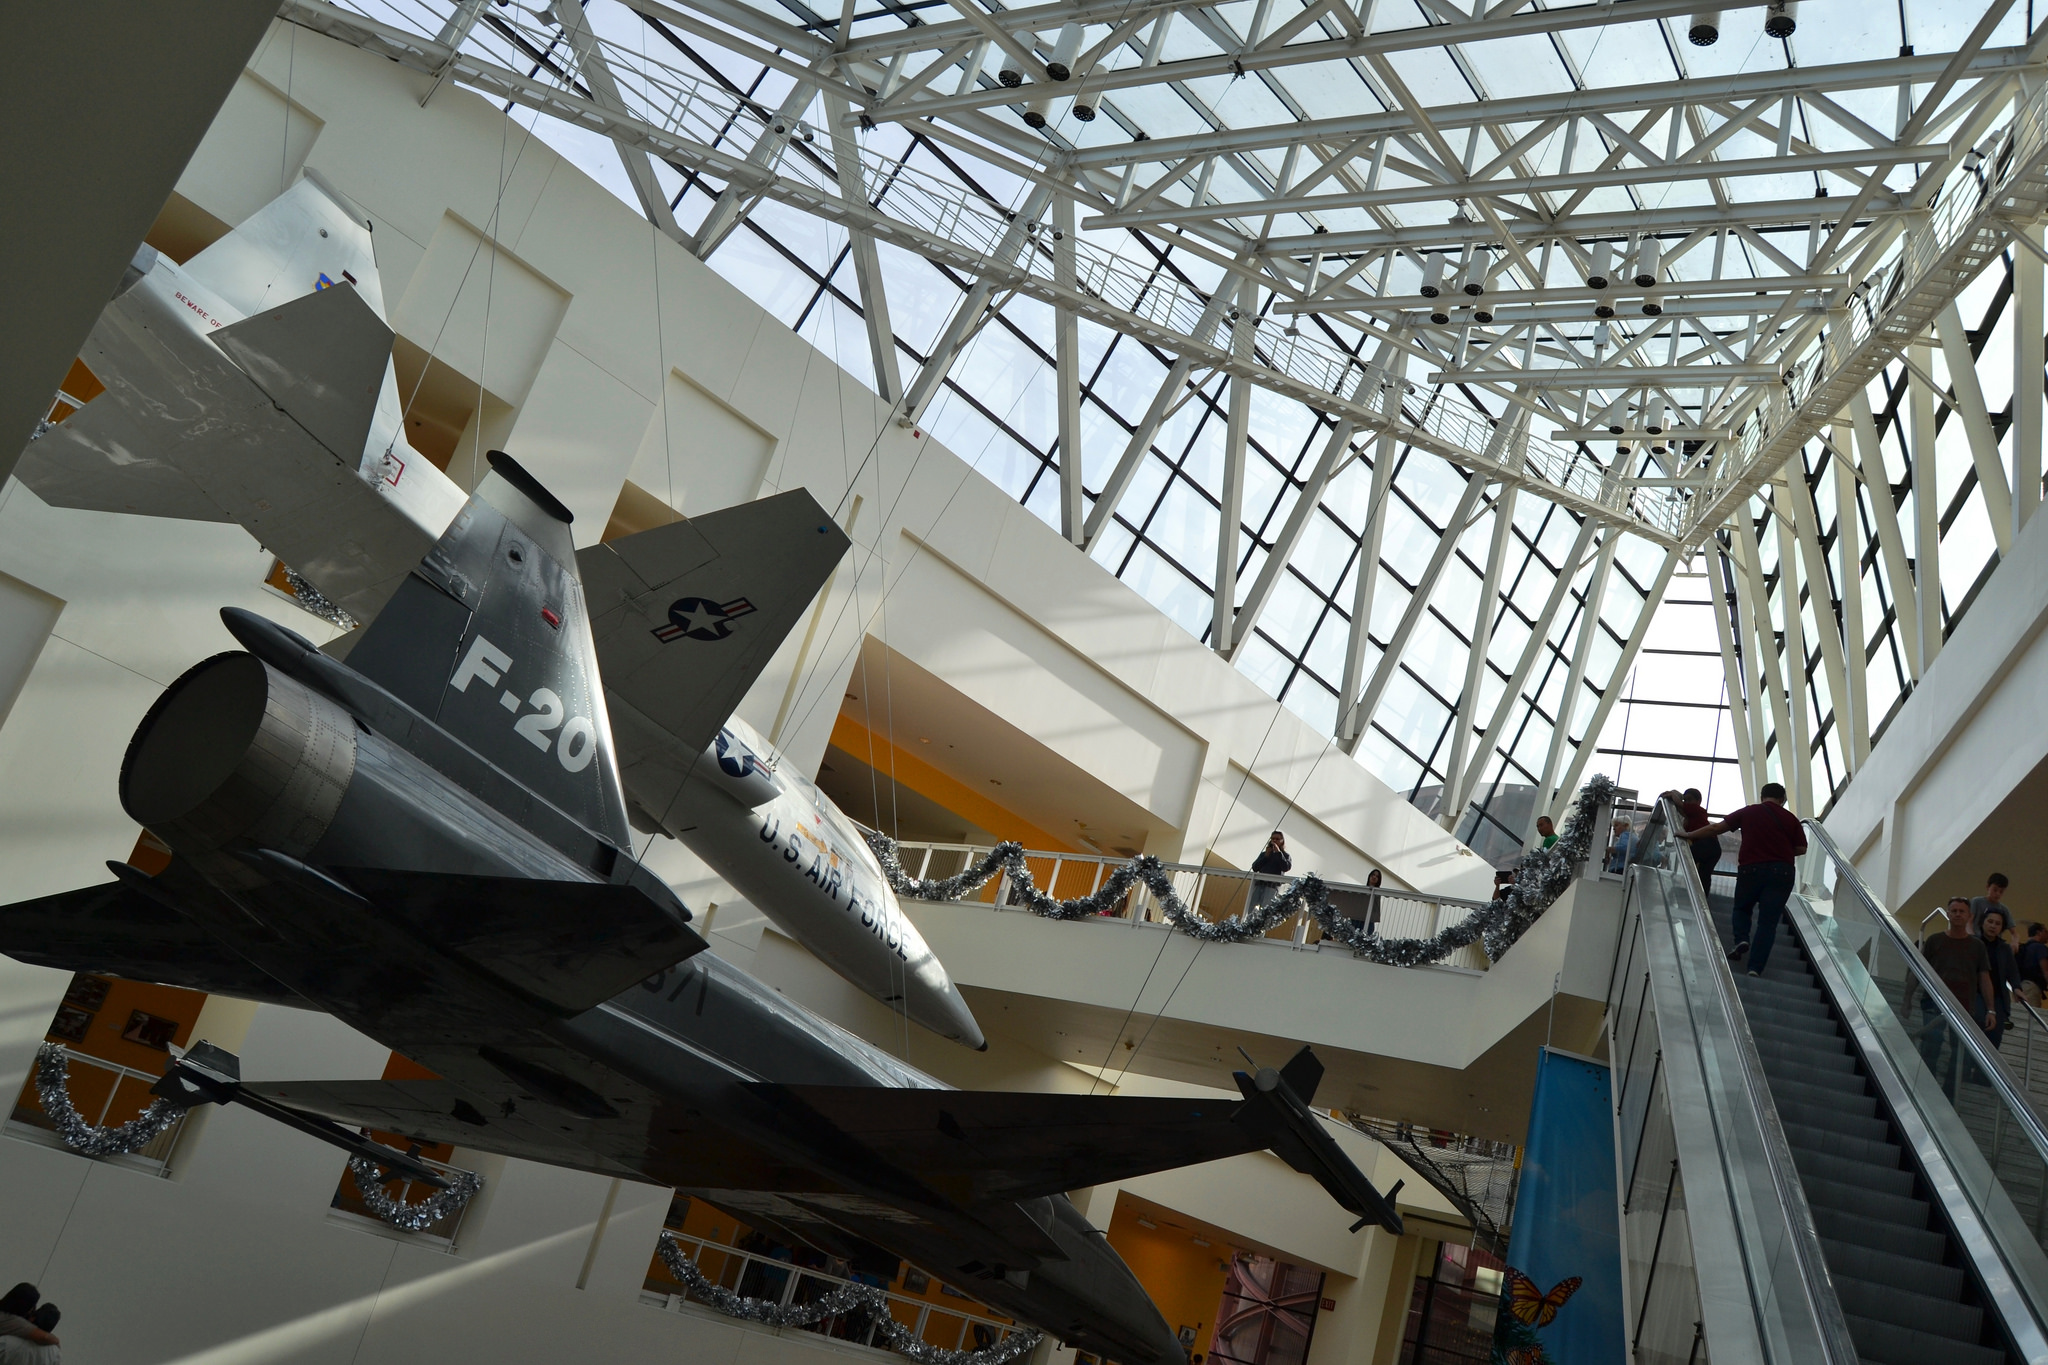 An F-20 Tigershark and T-38 Talon hang inside the California Science Center. Photo by ATOMIC Hot Links via Flickr.